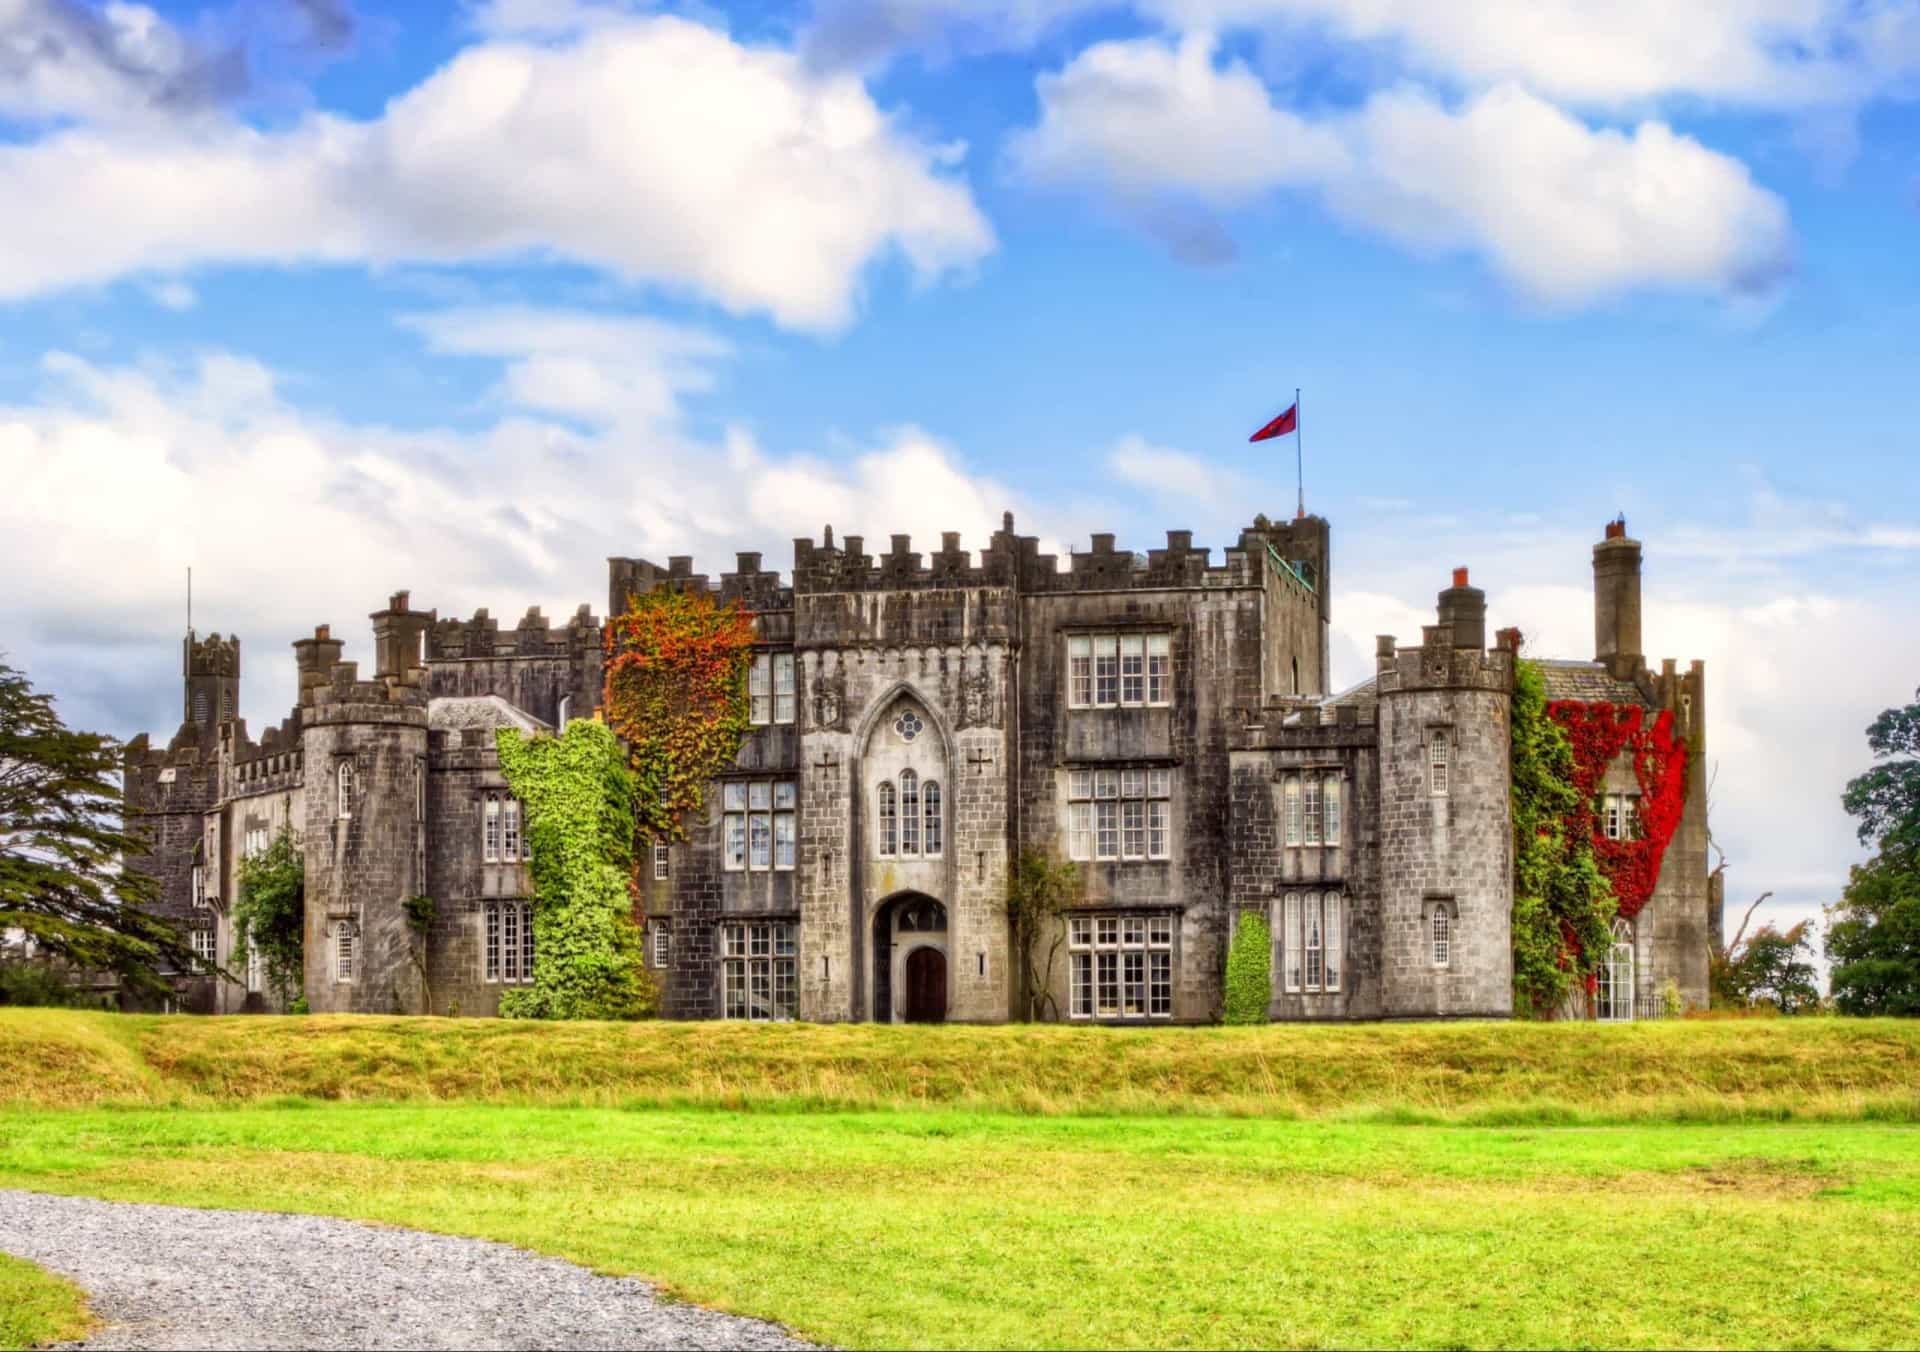 <p>Birr is another designated Irish heritage town with a carefully-preserved Georgian architectural signature. Its principal tourist draw is Birr castle, the residential areas of which are not open to the public, though the grounds and gardens are.</p>